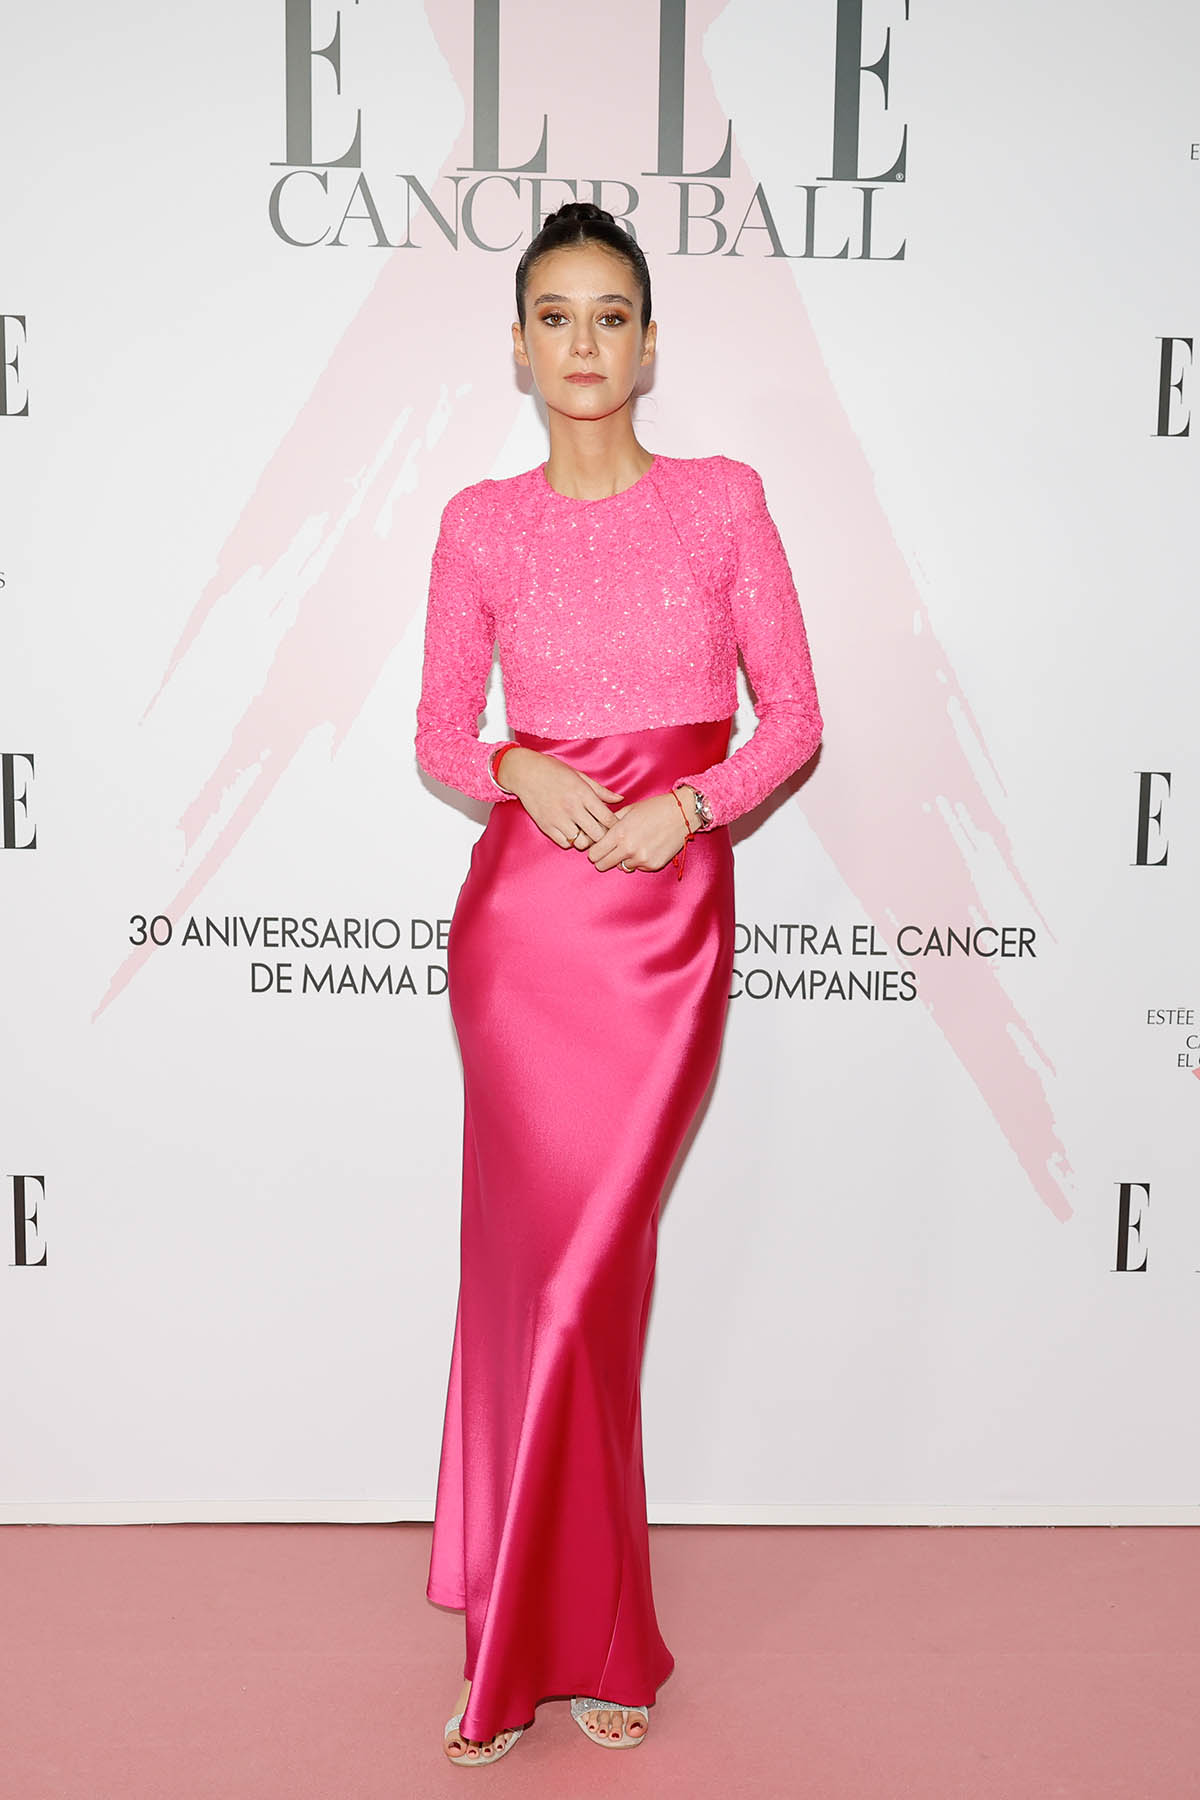 Victoria Federica Marichalar at photocall for Elle Cancer Ball event in Madrid on Thursday, 20 October 2022.